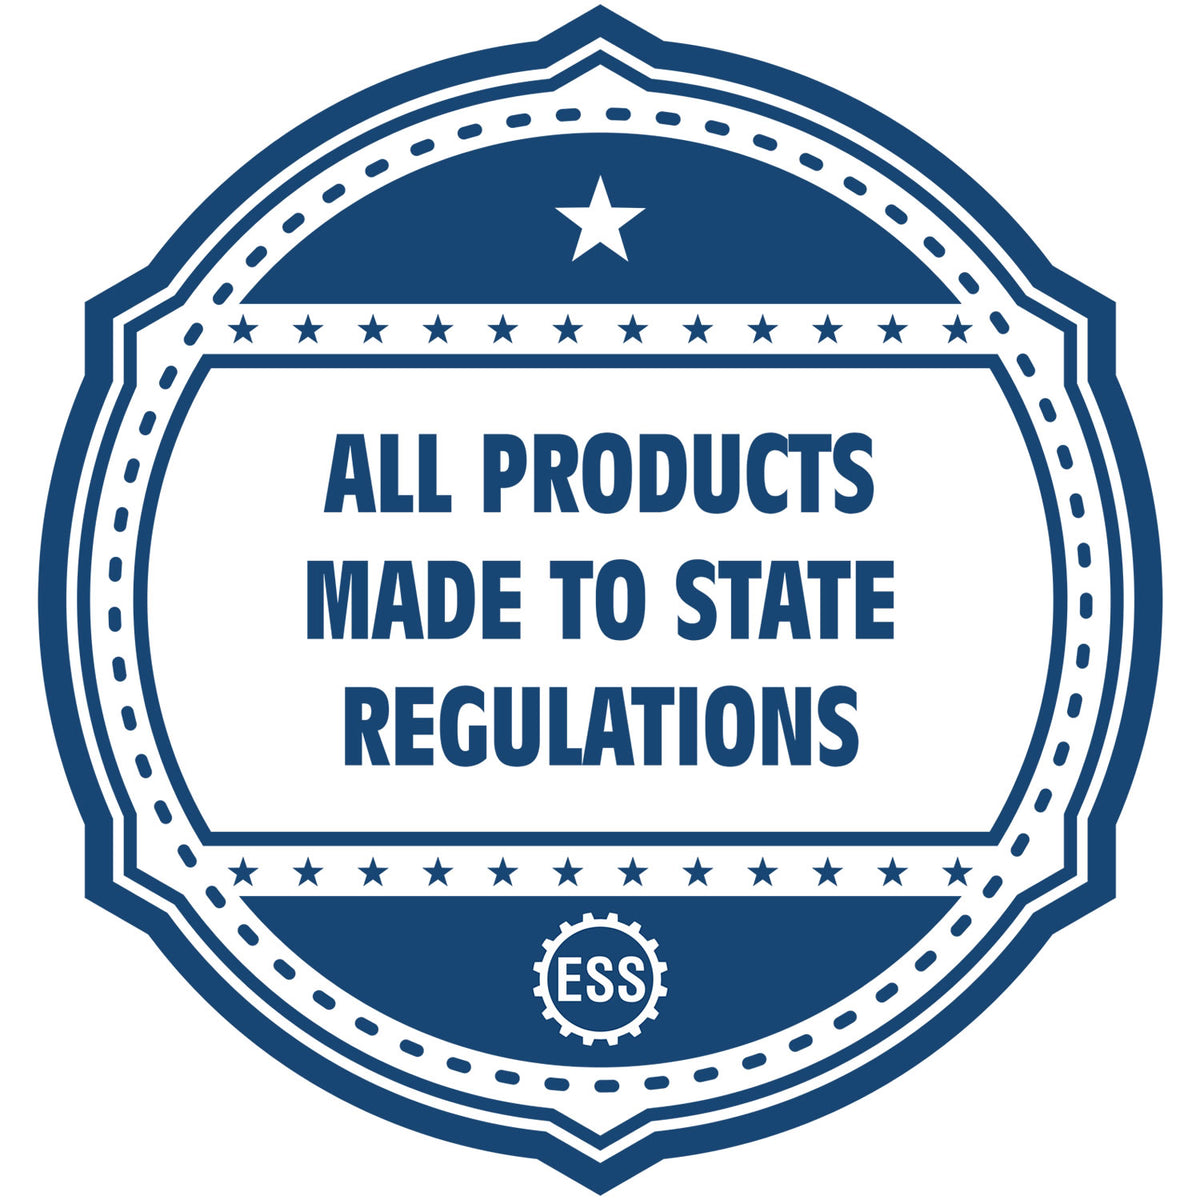 An icon or badge element for the Digital Missouri Landscape Architect Stamp showing that this product is made in compliance with state regulations.